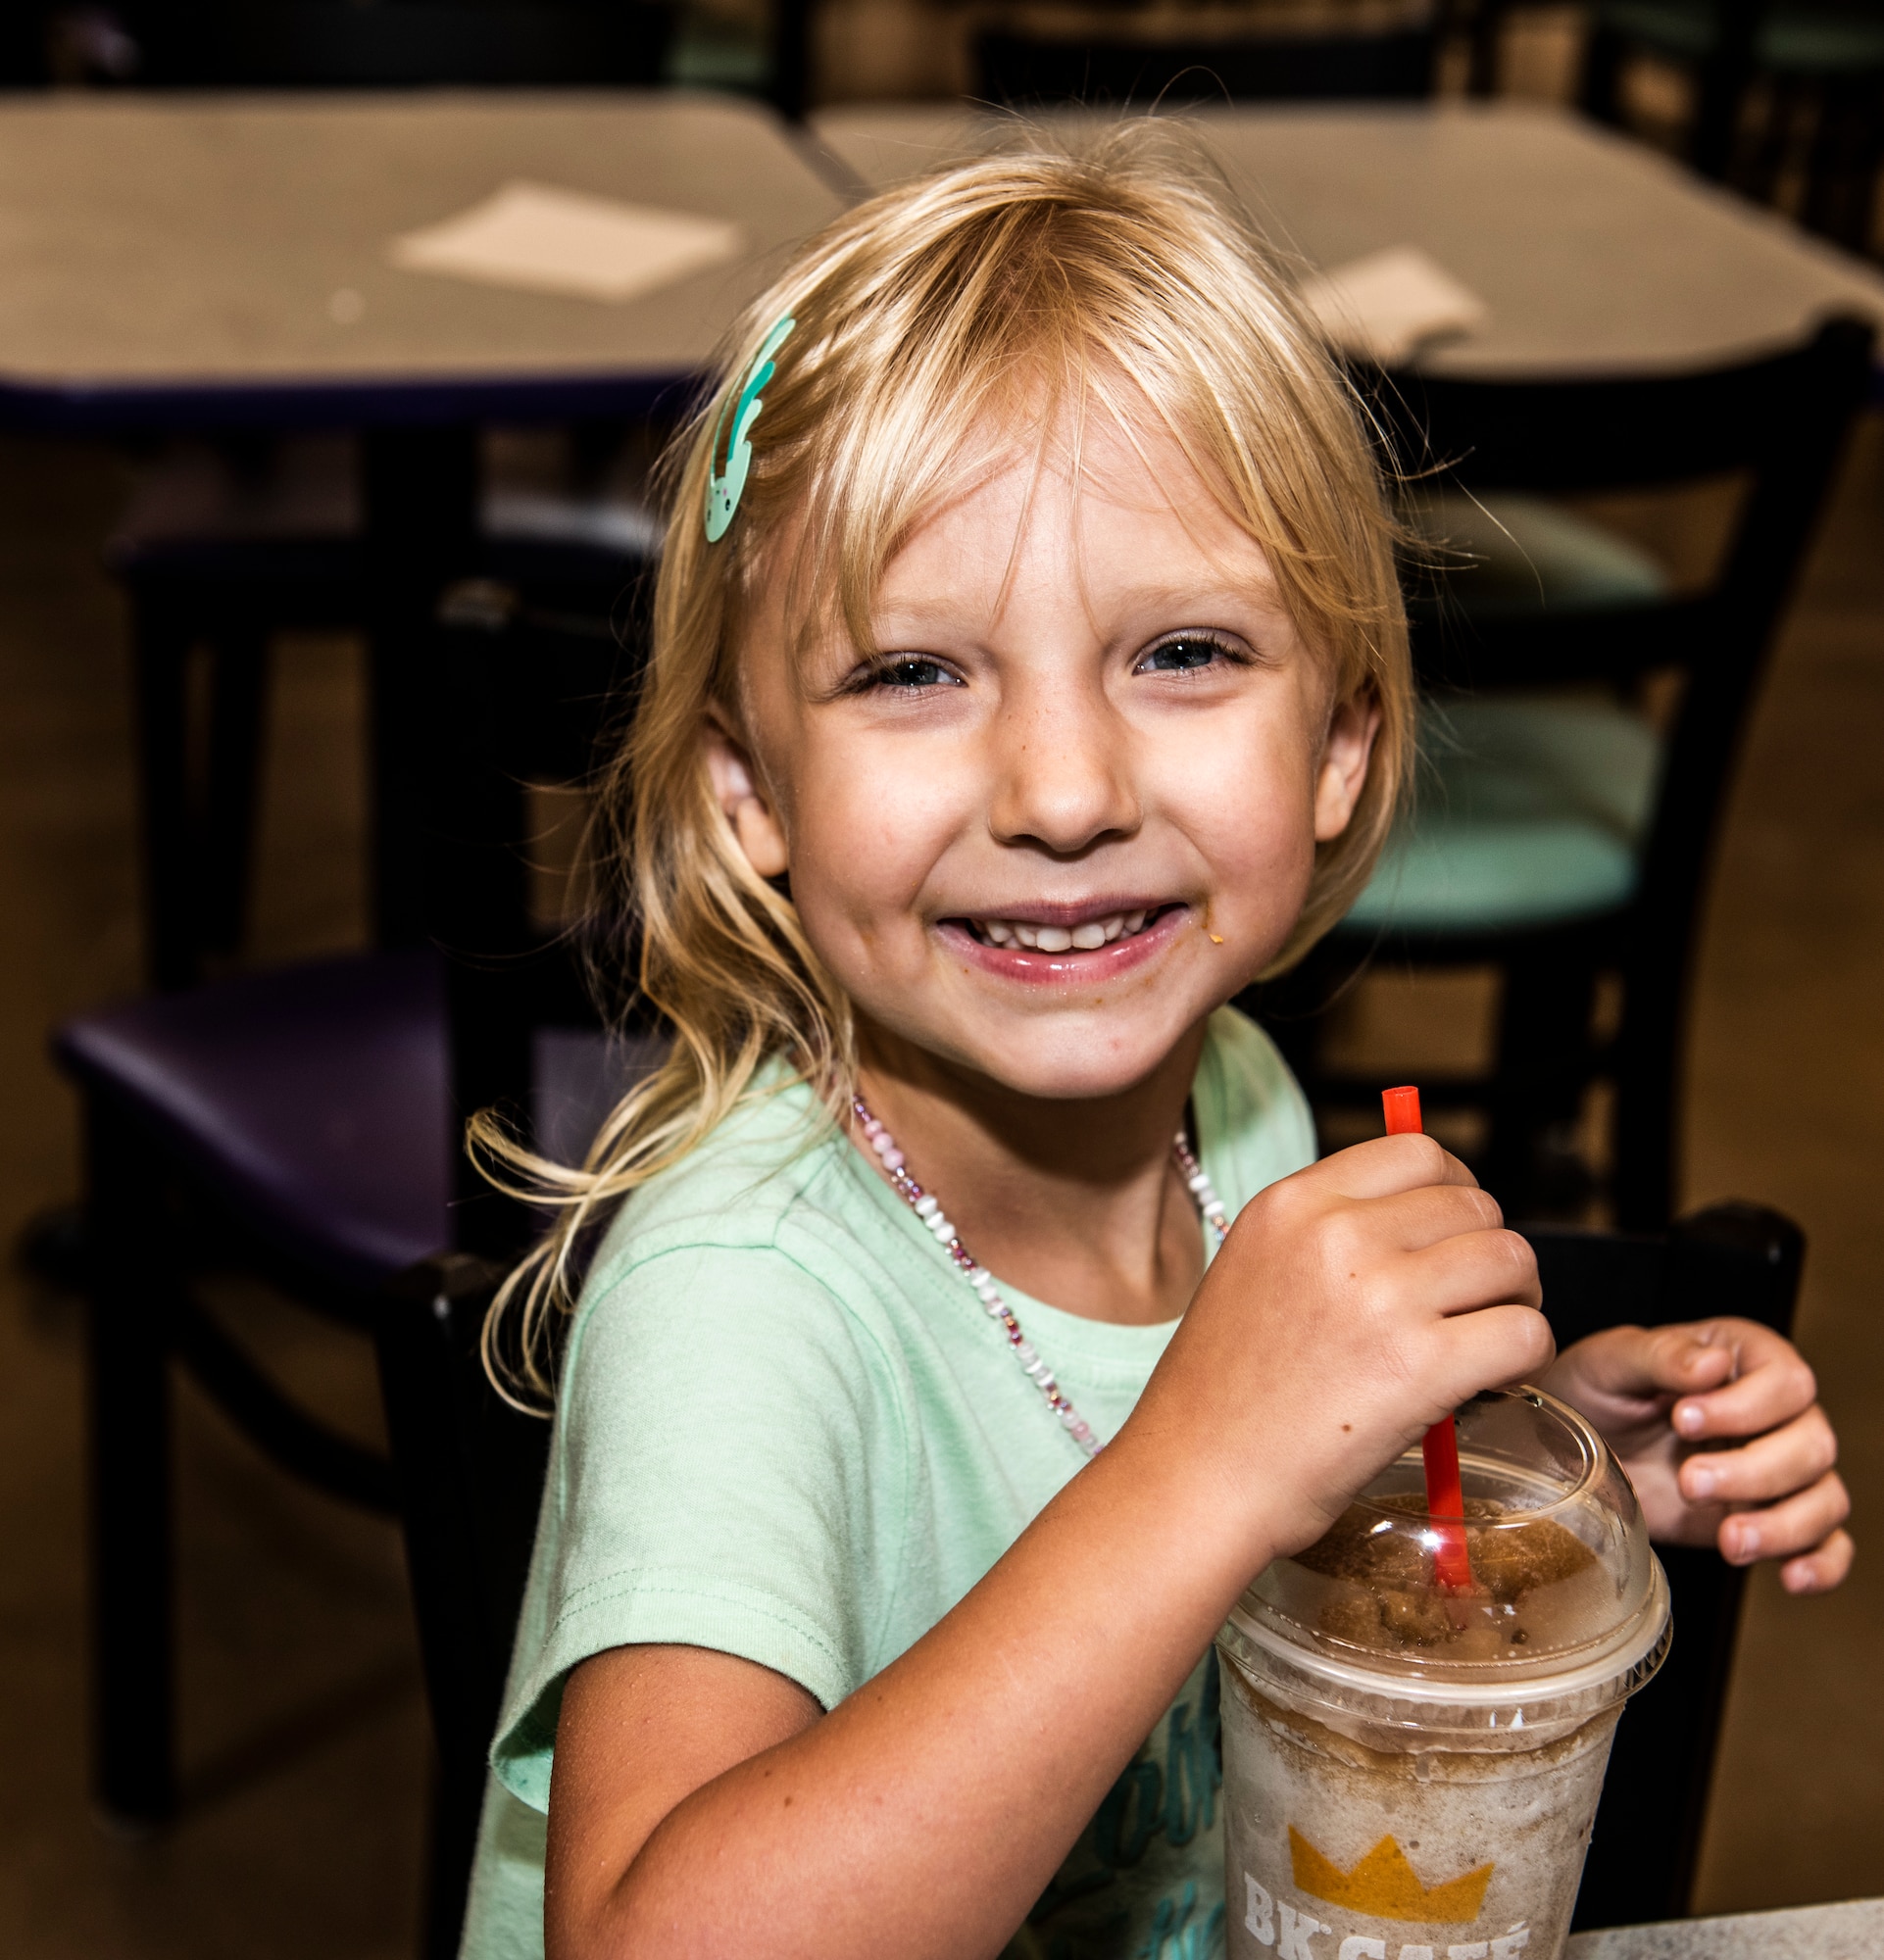 Lily, daughter of Lt. Col. Jim Coughlin, drinks a milkshake after mass at Shaw Air Force Base, S.C. Sept. 09, 2019.